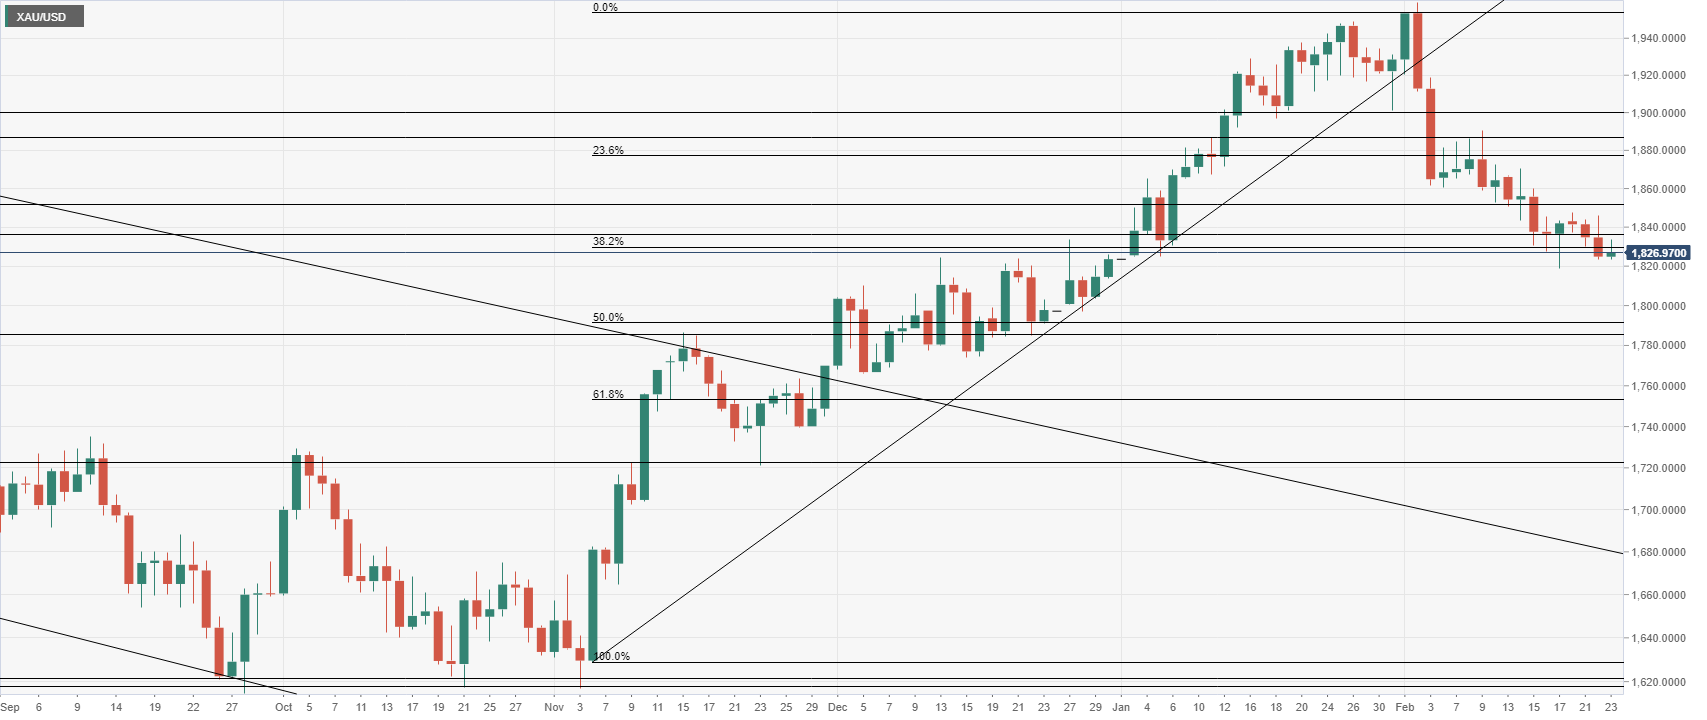 Gold price daily chart shows bearish trend